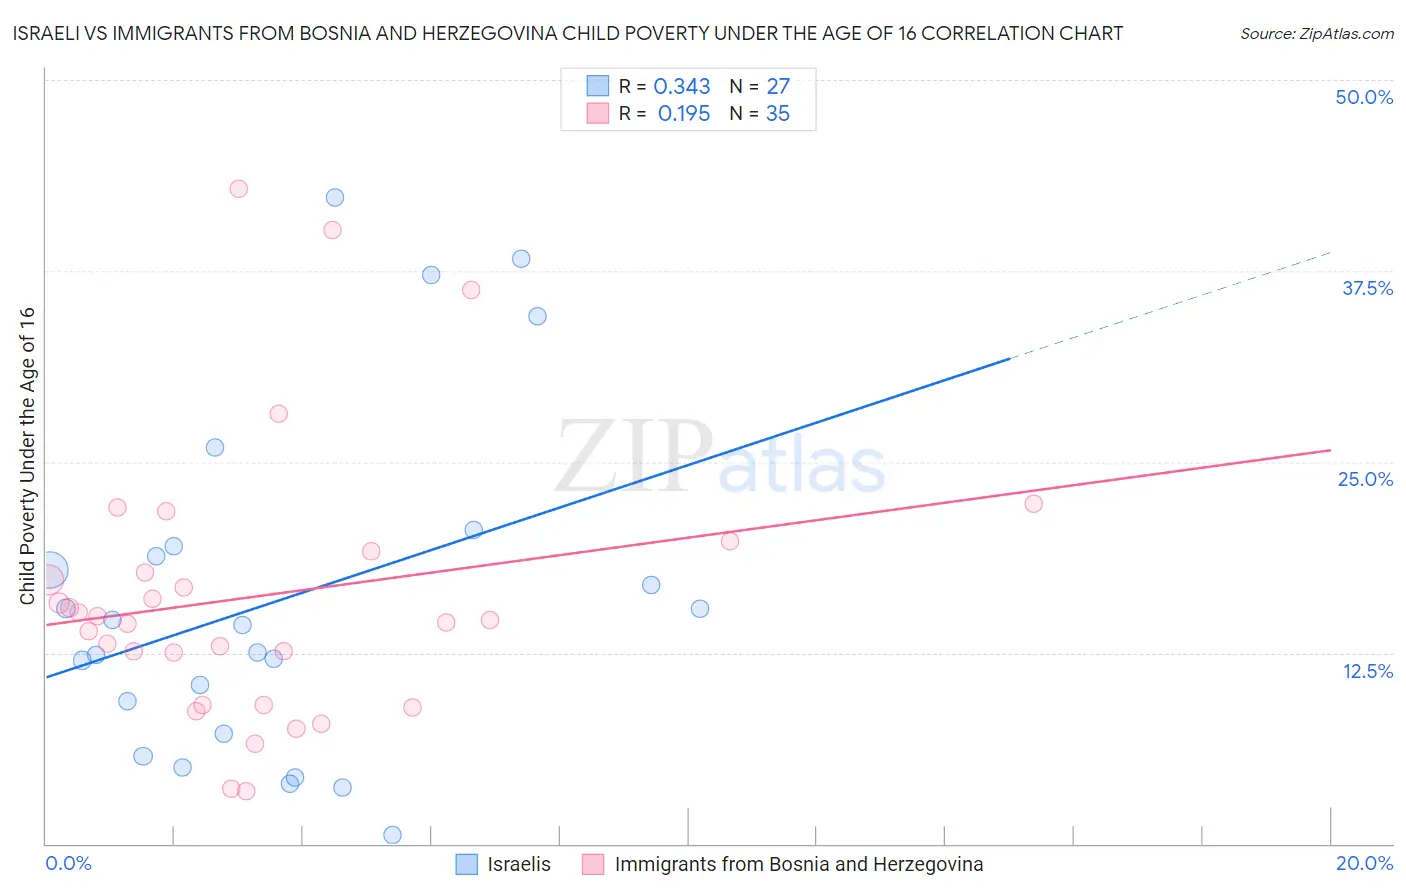 Israeli vs Immigrants from Bosnia and Herzegovina Child Poverty Under the Age of 16